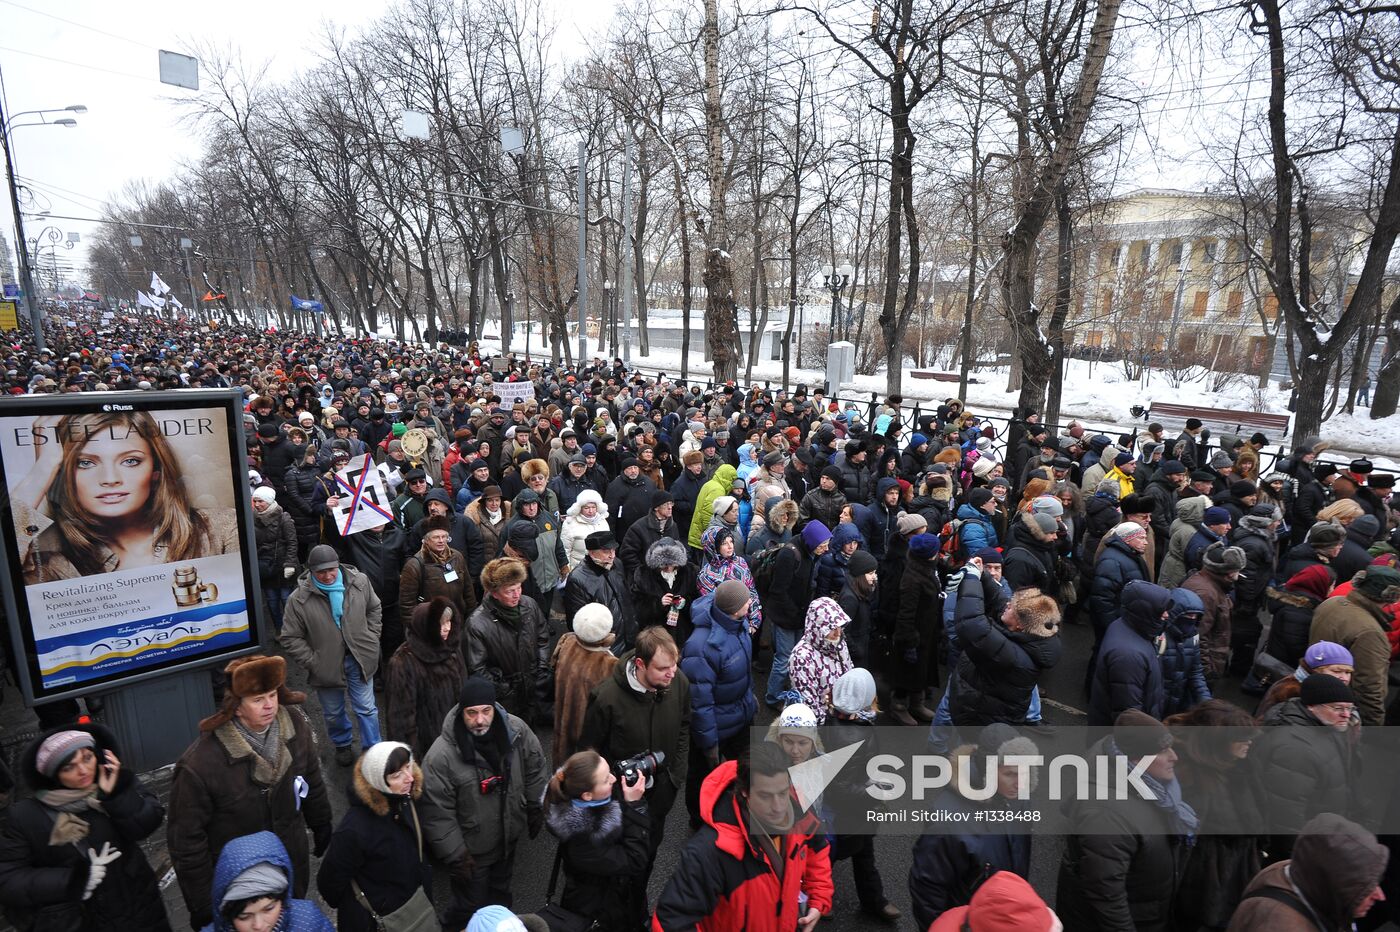 Opposition rallies in Moscow against anti-Magnitsky law